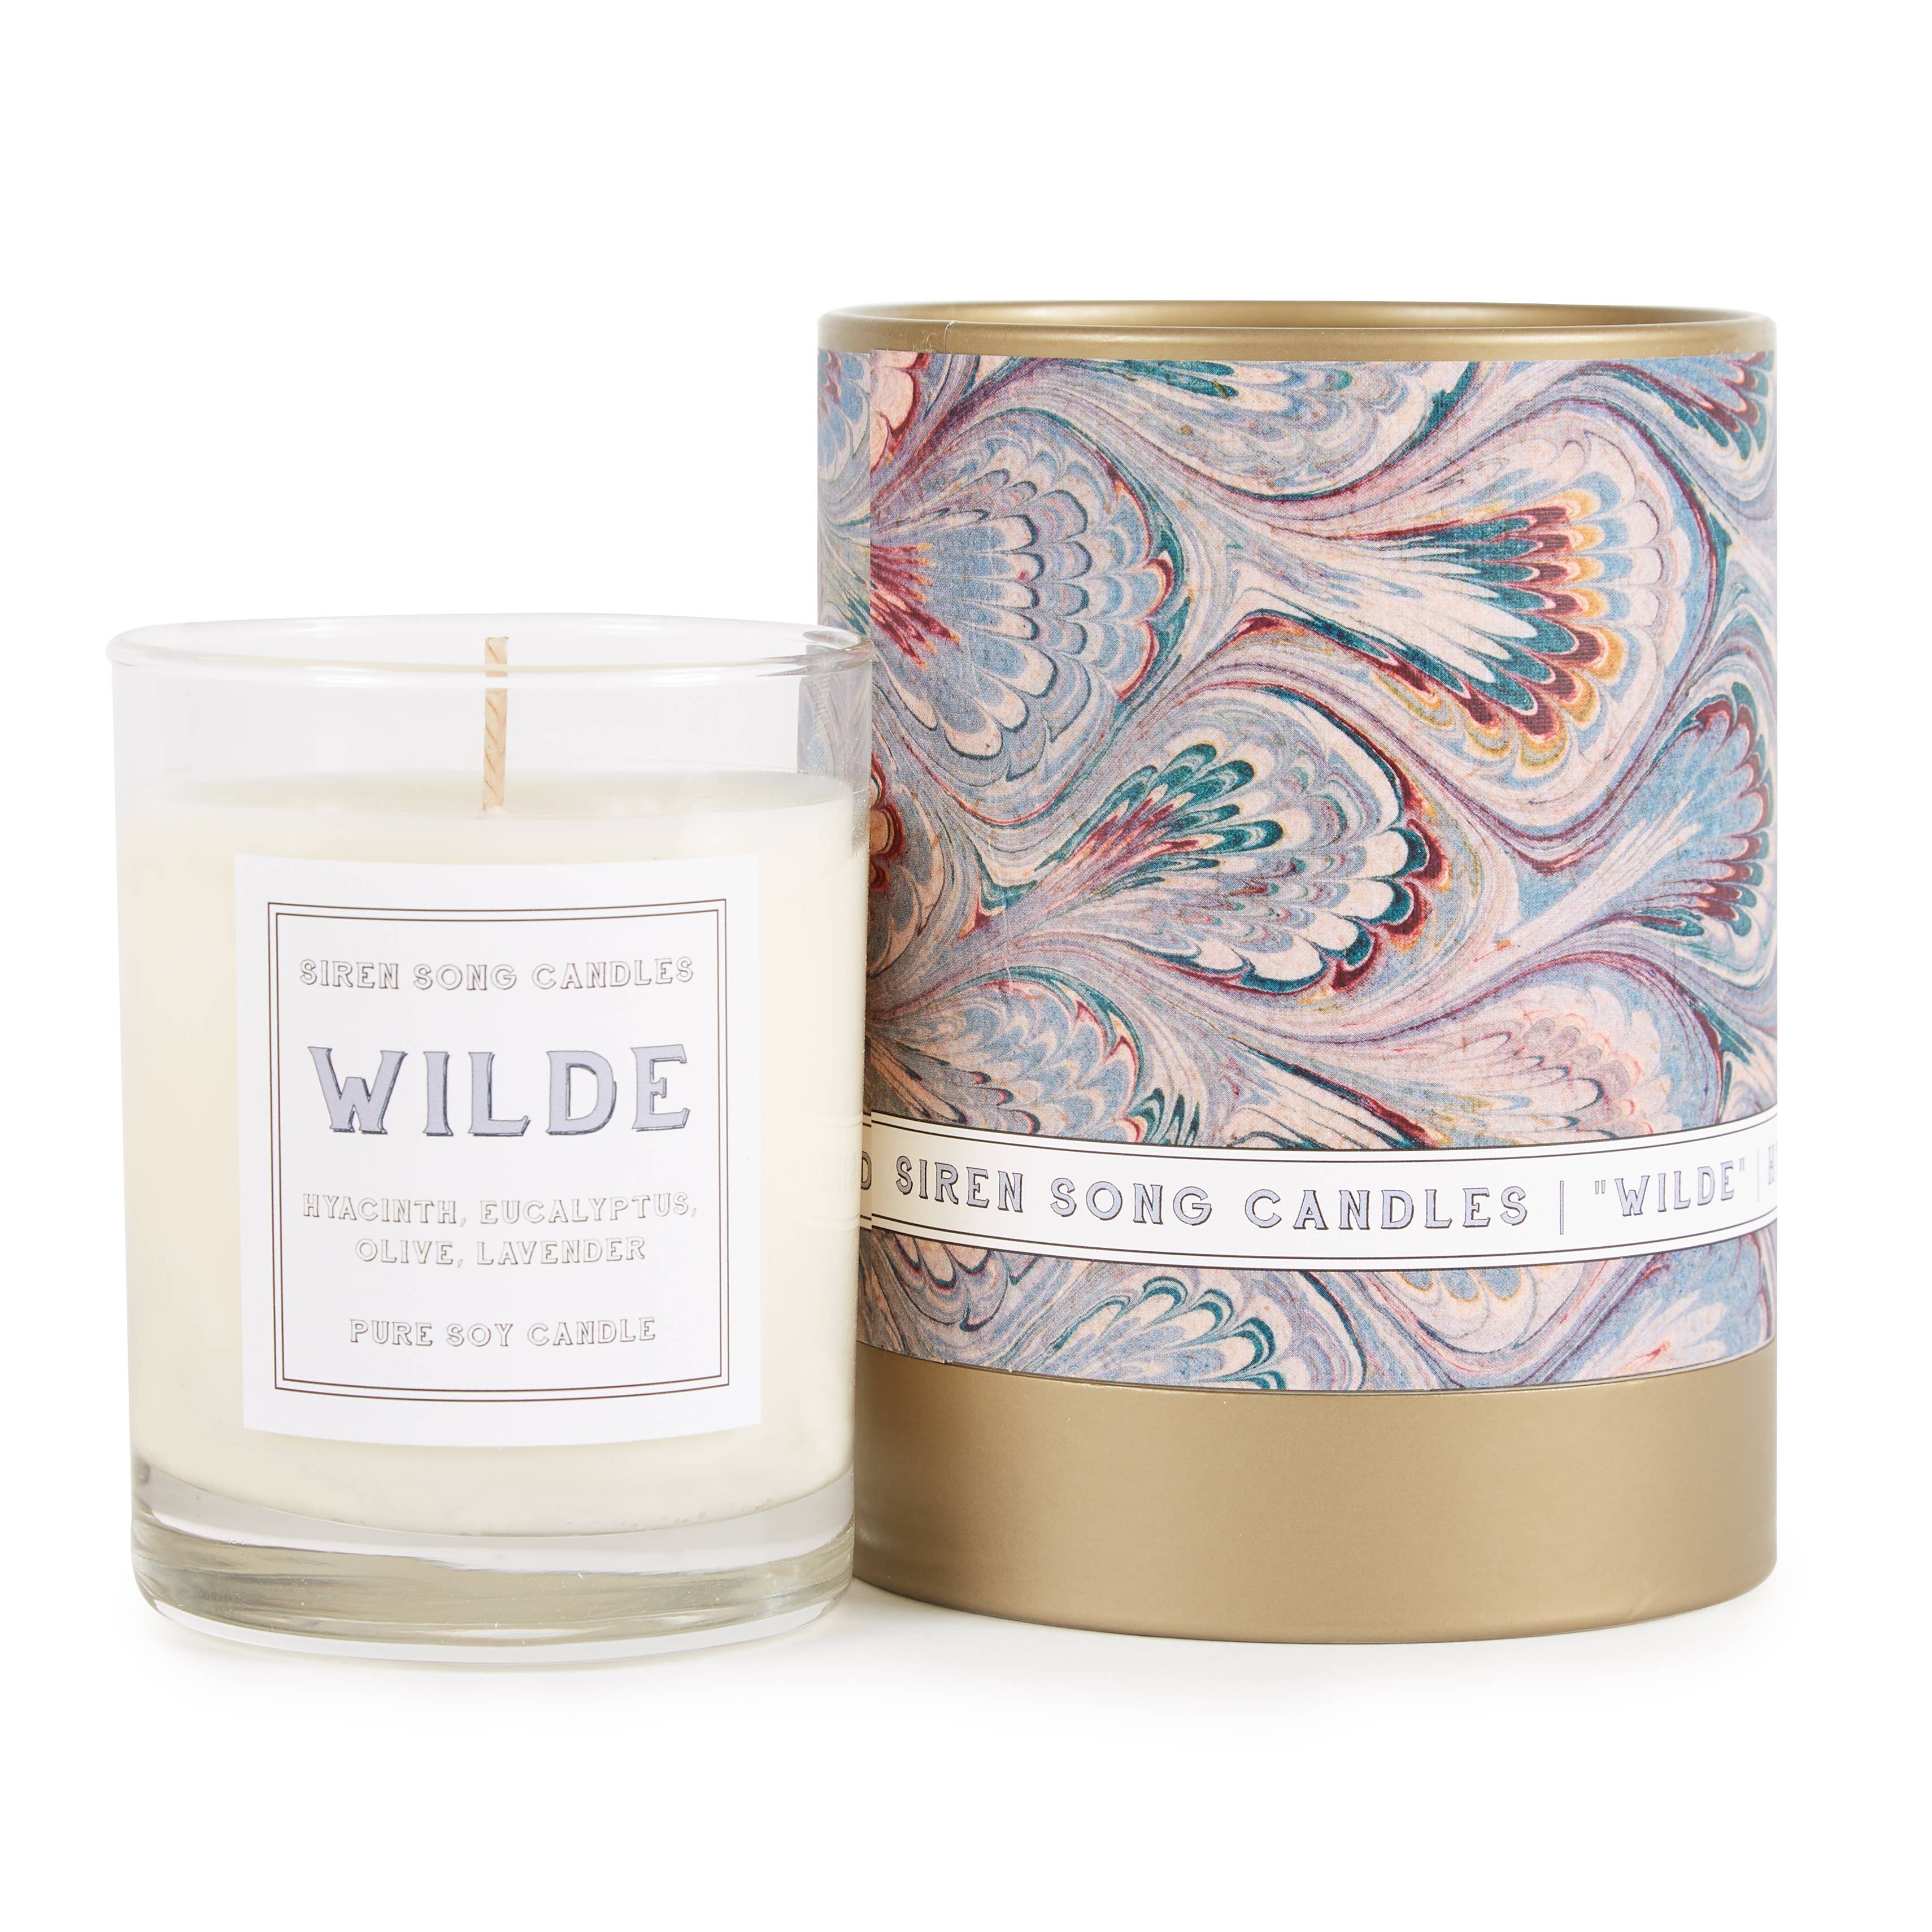 WILDE SOY CANDLE